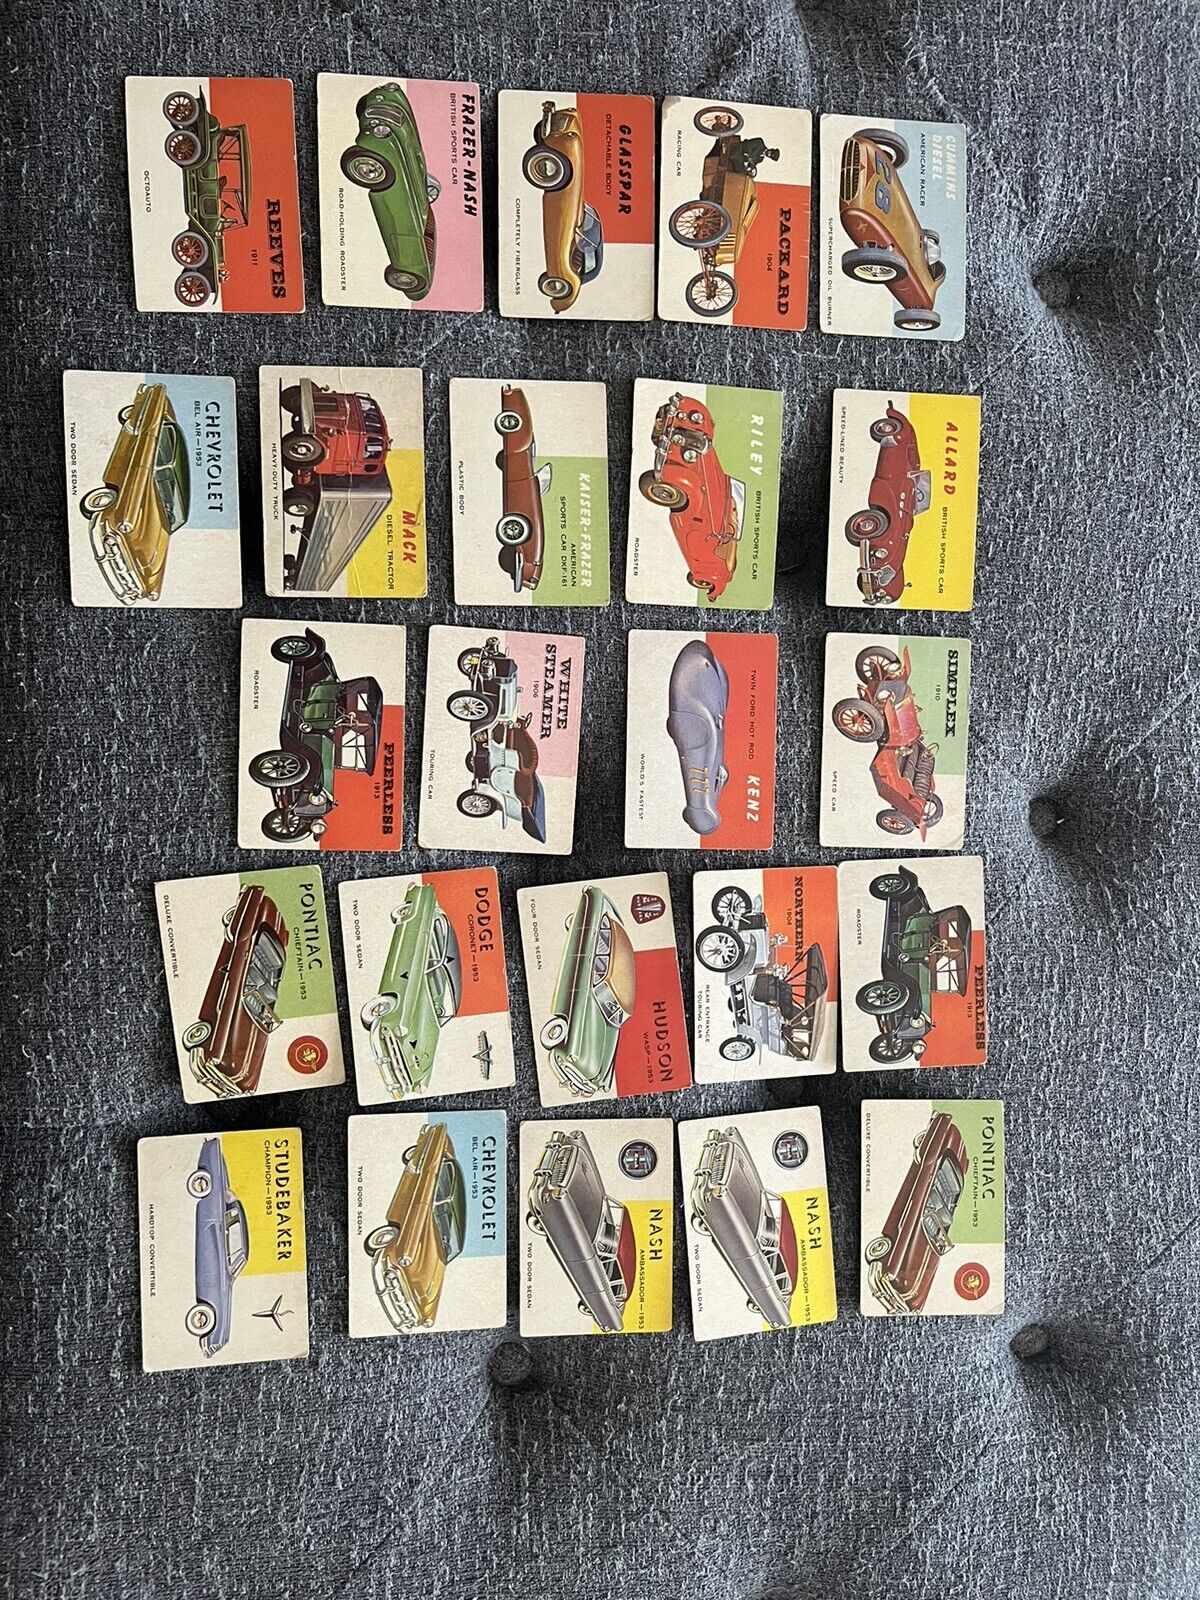 Circa 1954 TOPPS “ World On Wheels” Cards.  Lot of 24 cards.